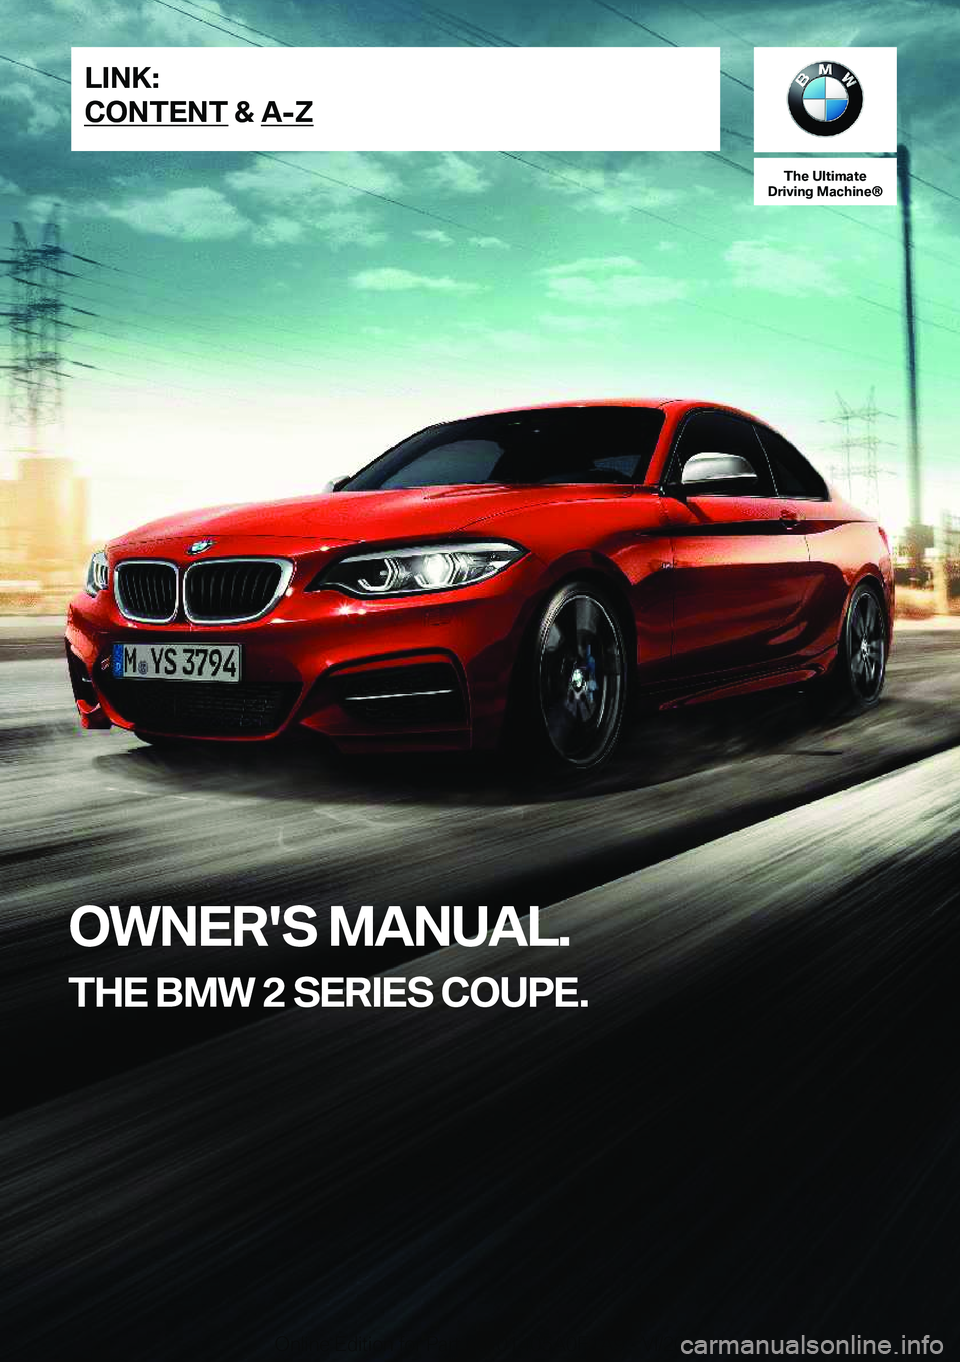 BMW 2 SERIES COUPE 2021  Owners Manual �T�h�e��U�l�t�i�m�a�t�e
�D�r�i�v�i�n�g��M�a�c�h�i�n�e�n
�O�W�N�E�R�'�S��M�A�N�U�A�L�.
�T�H�E��B�M�W��2��S�E�R�I�E�S��C�O�U�P�E�.�L�I�N�K�:
�C�O�N�T�E�N�T��&��A�-�Z�O�n�l�i�n�e��E�d�i�t�i